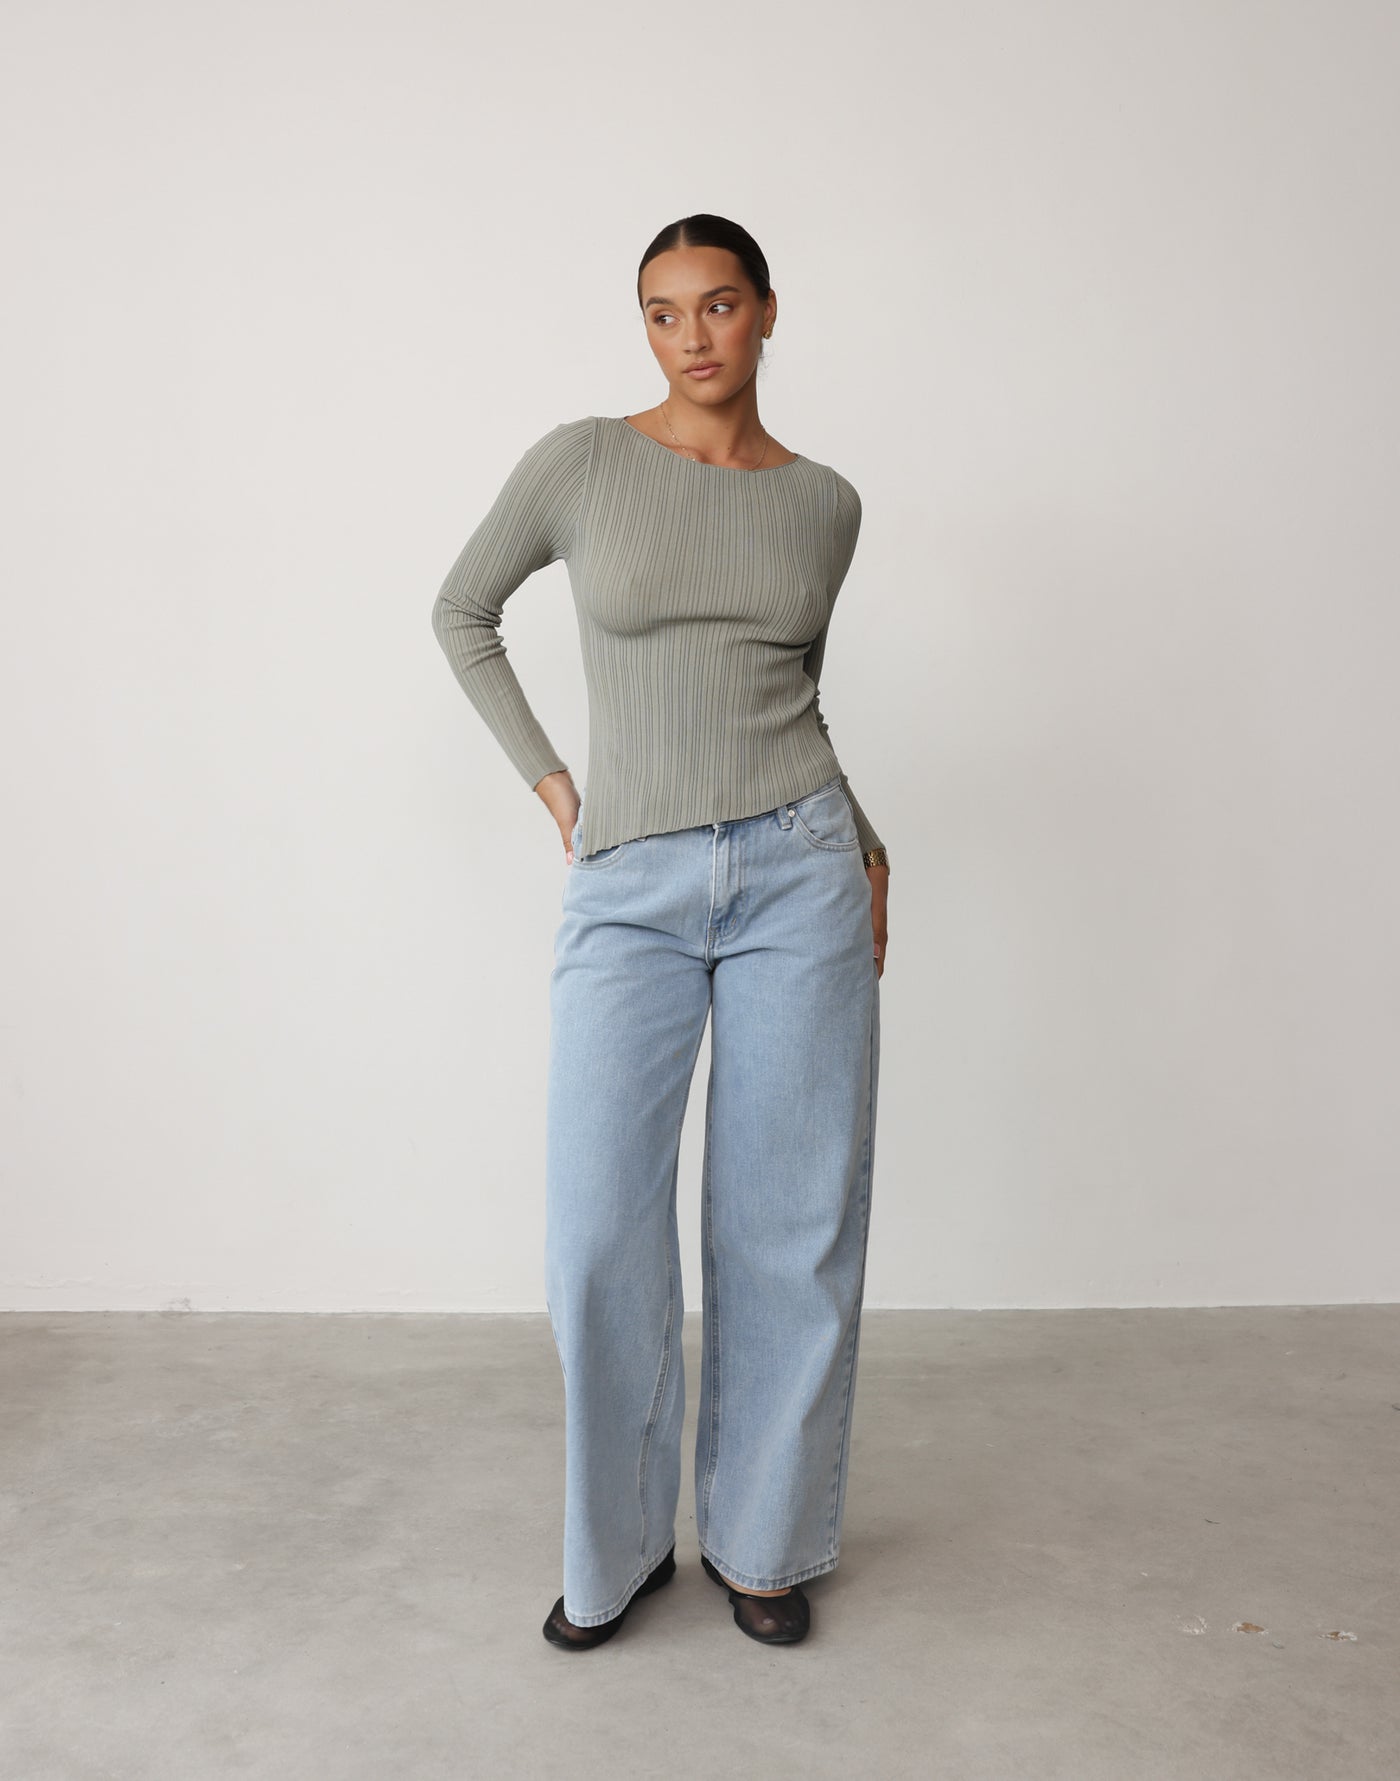 Kienna Long Sleeve Top (Willow) | CHARCOAL Exclusive - Ribbed Long Sleeve Asymmetrical Hem Boat Neck Top - Women's Top - Charcoal Clothing